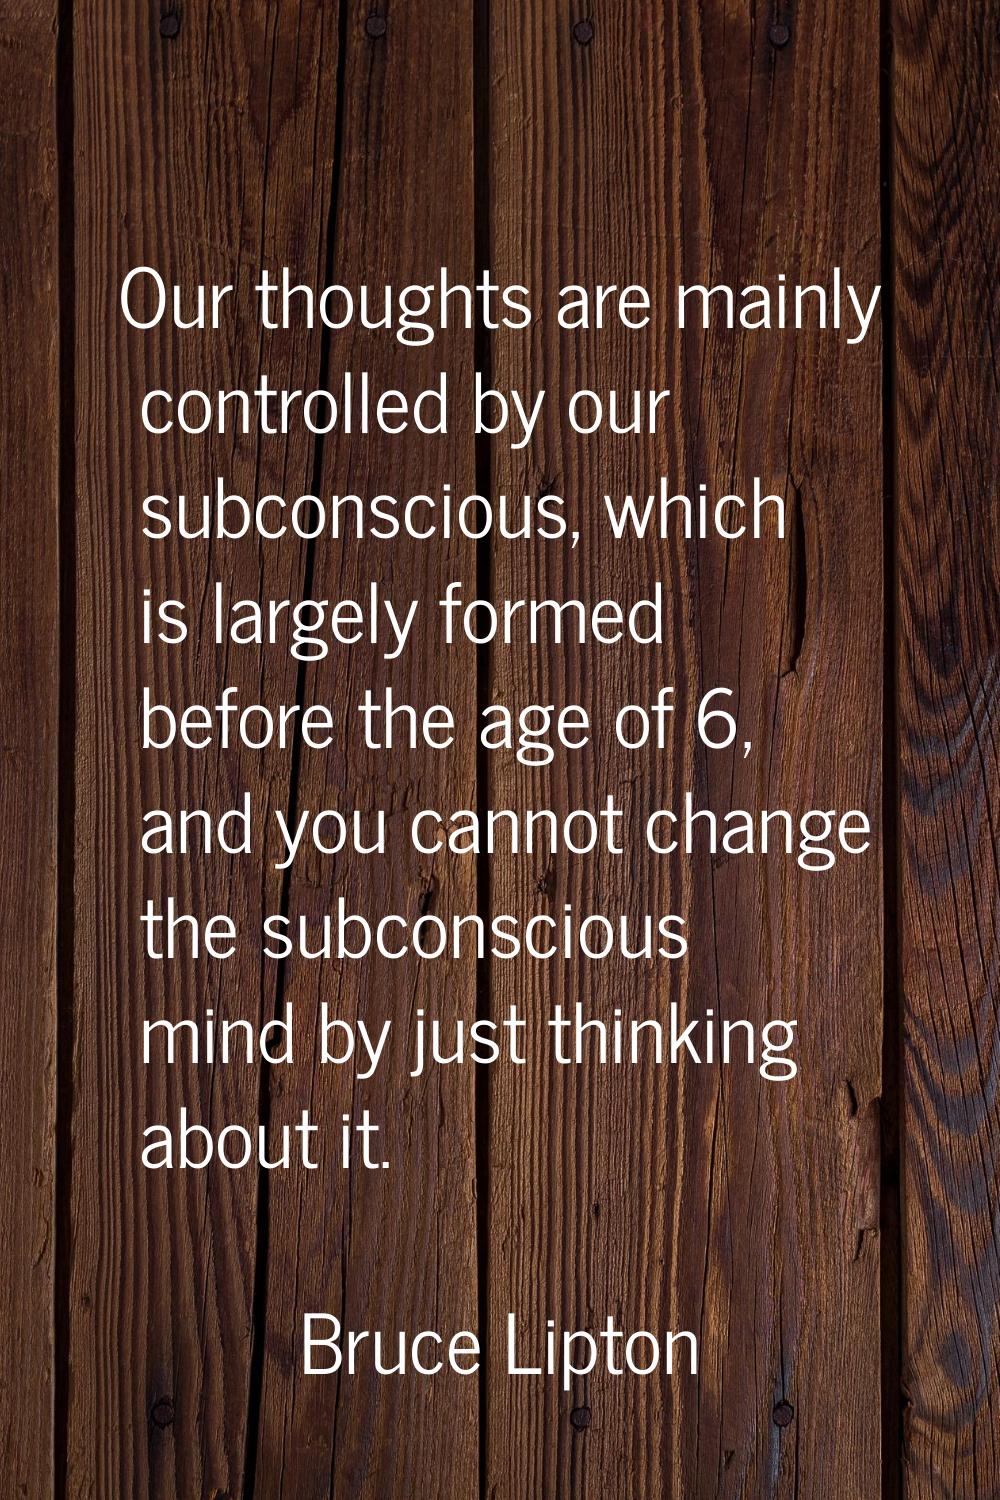 Our thoughts are mainly controlled by our subconscious, which is largely formed before the age of 6